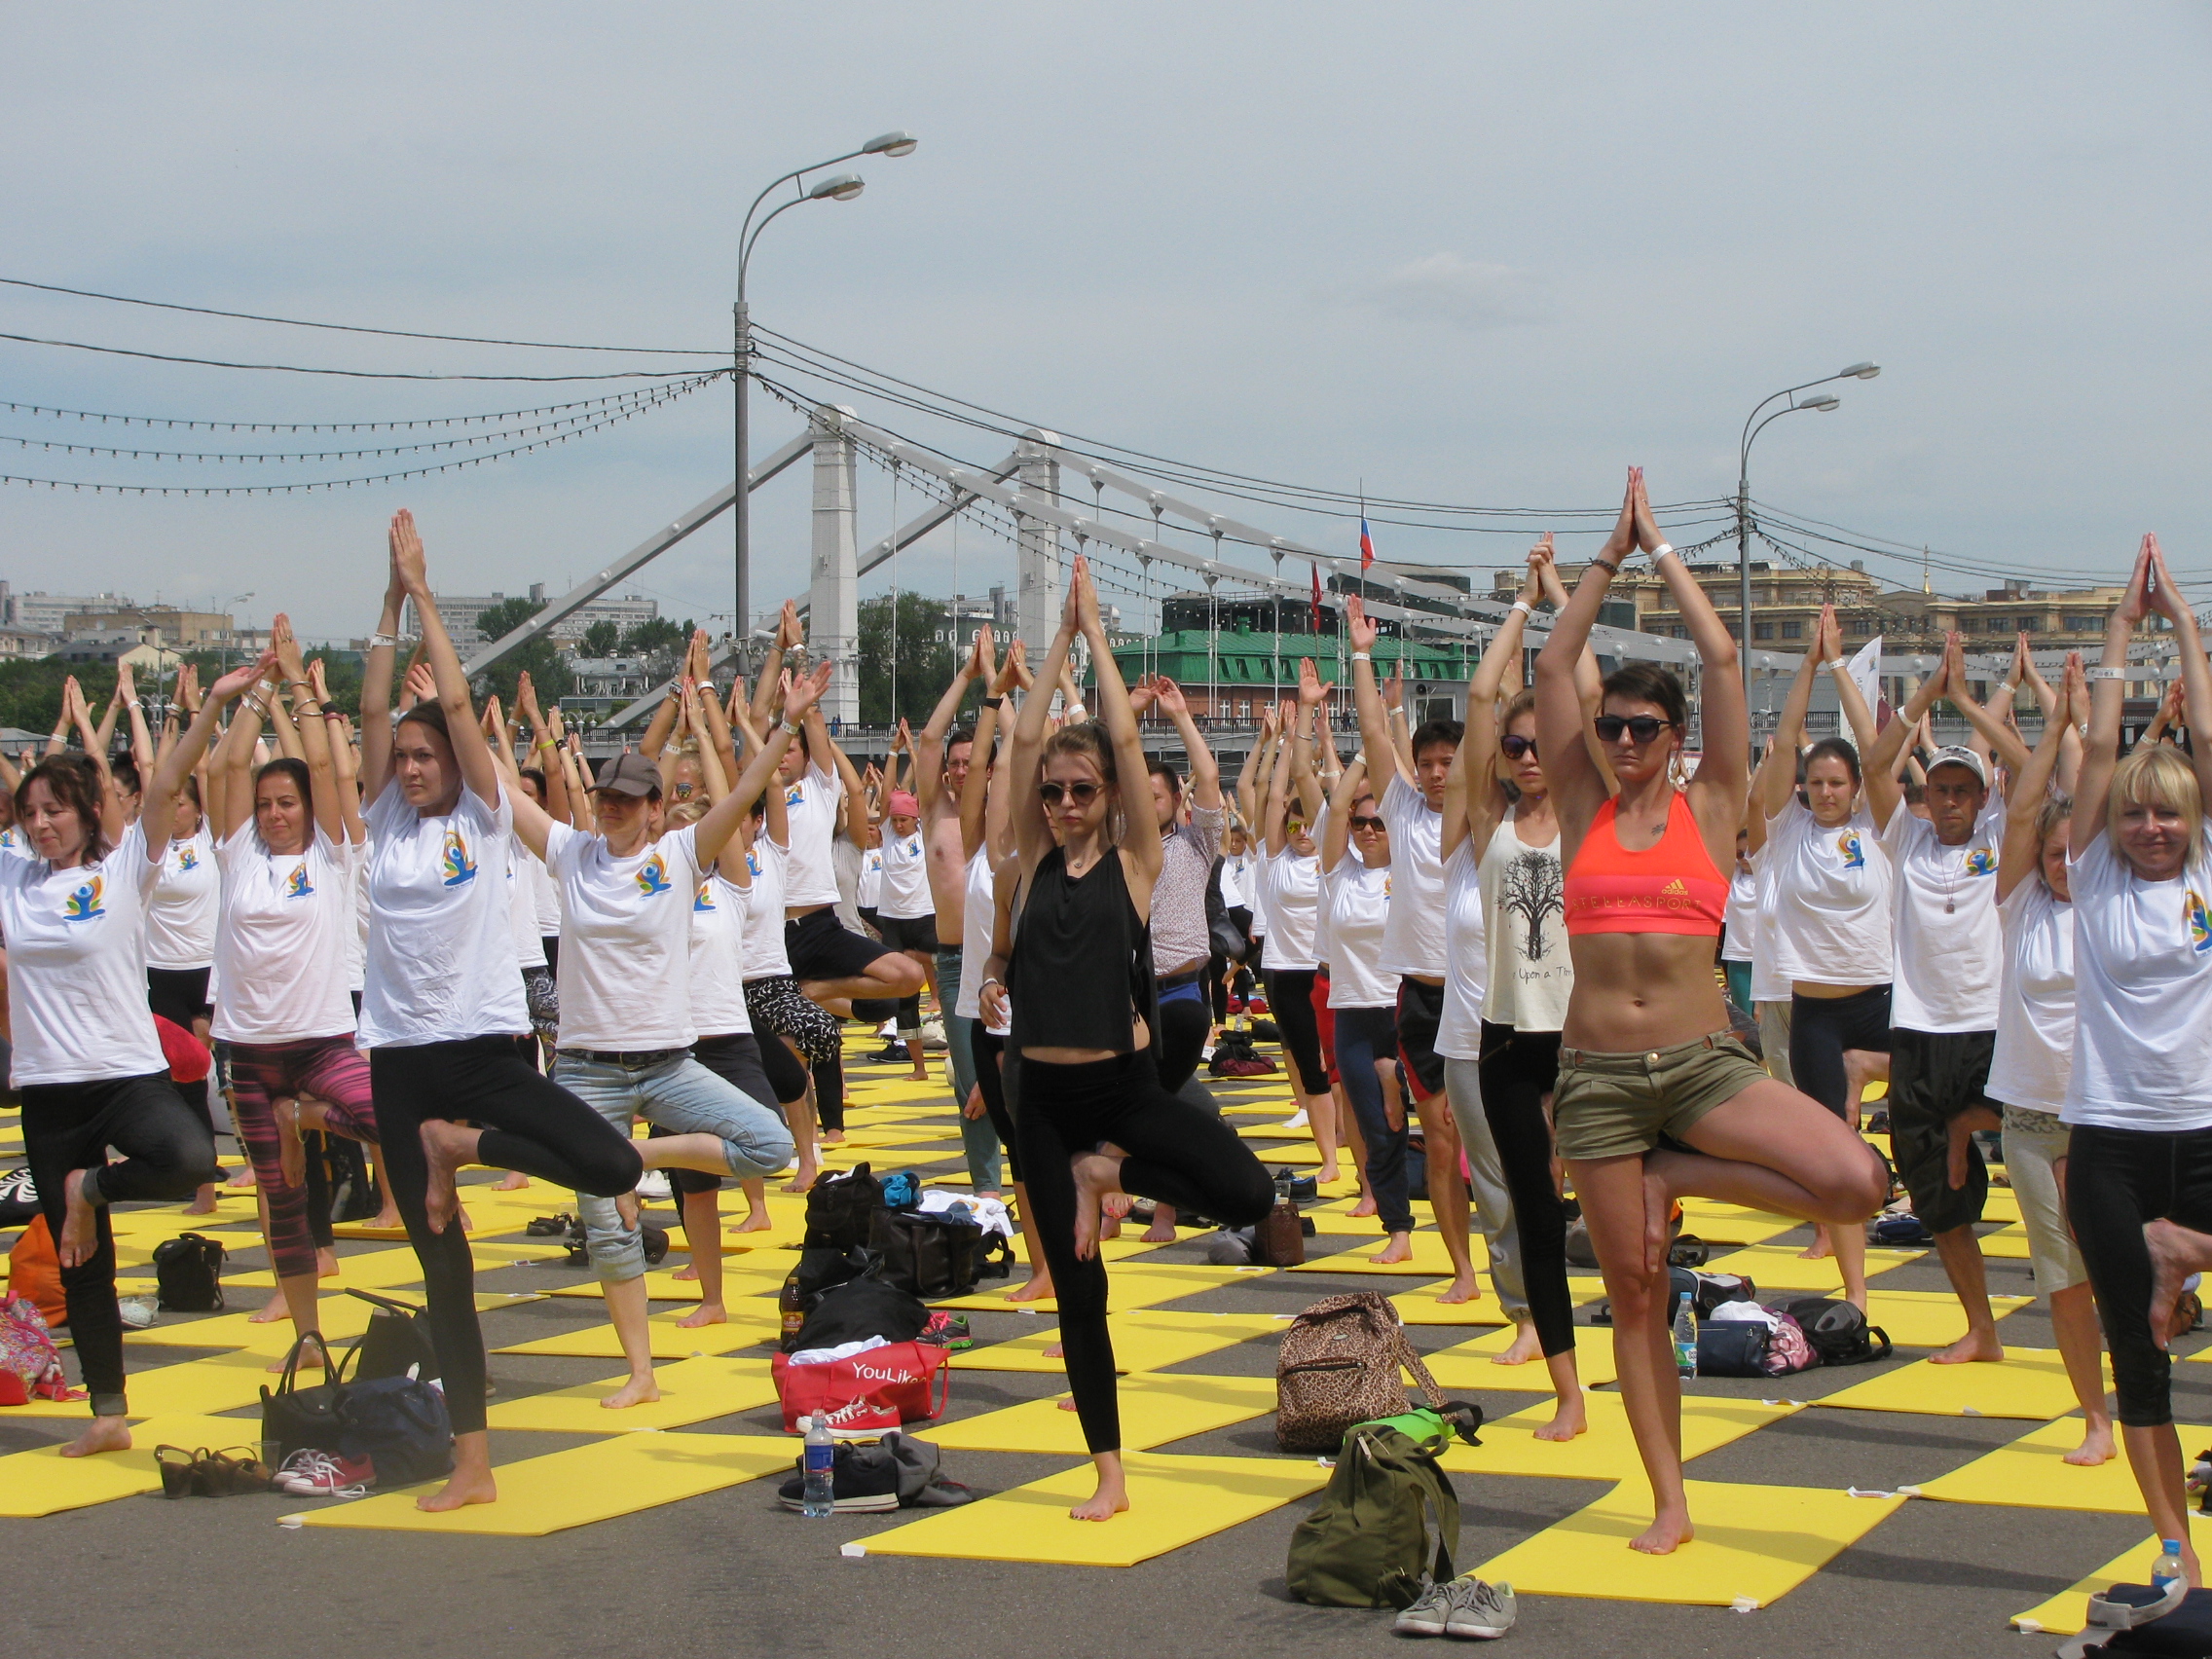 For a long time yoga did not receive a wide response and support in Russia, but in recent years due to the growing interest in India, the situation has changed.